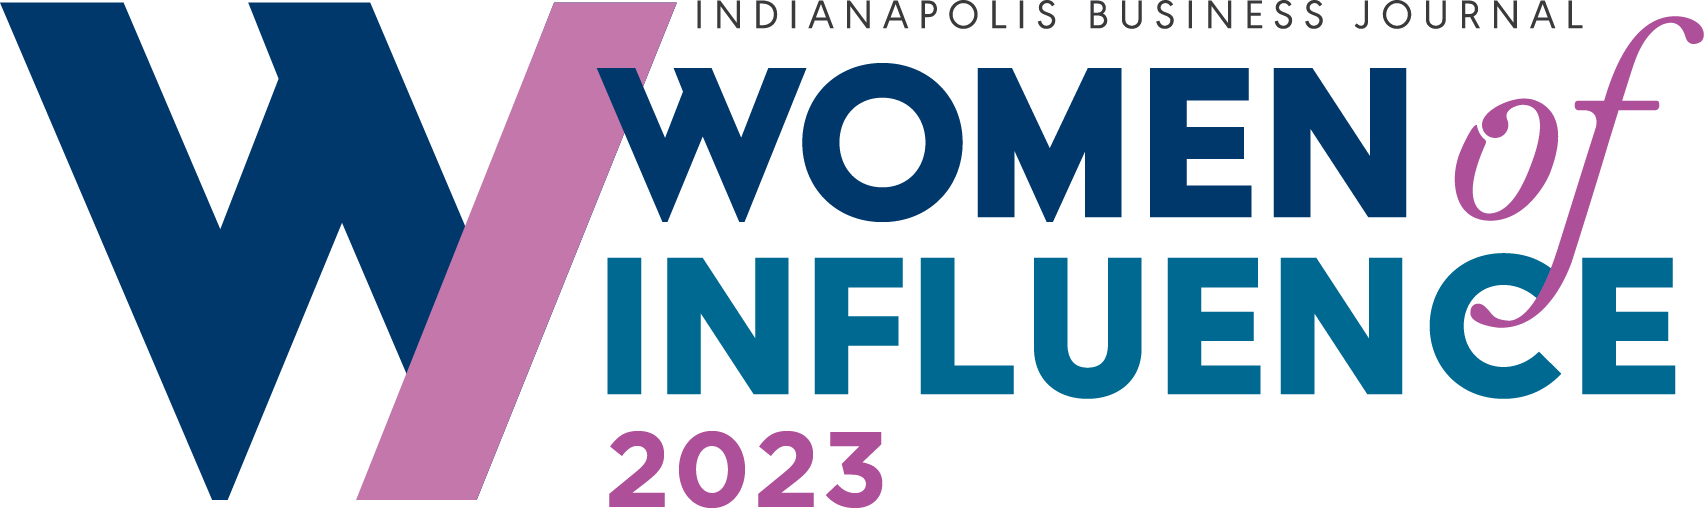 Indianapolis Business Journal Women of Influence 2023